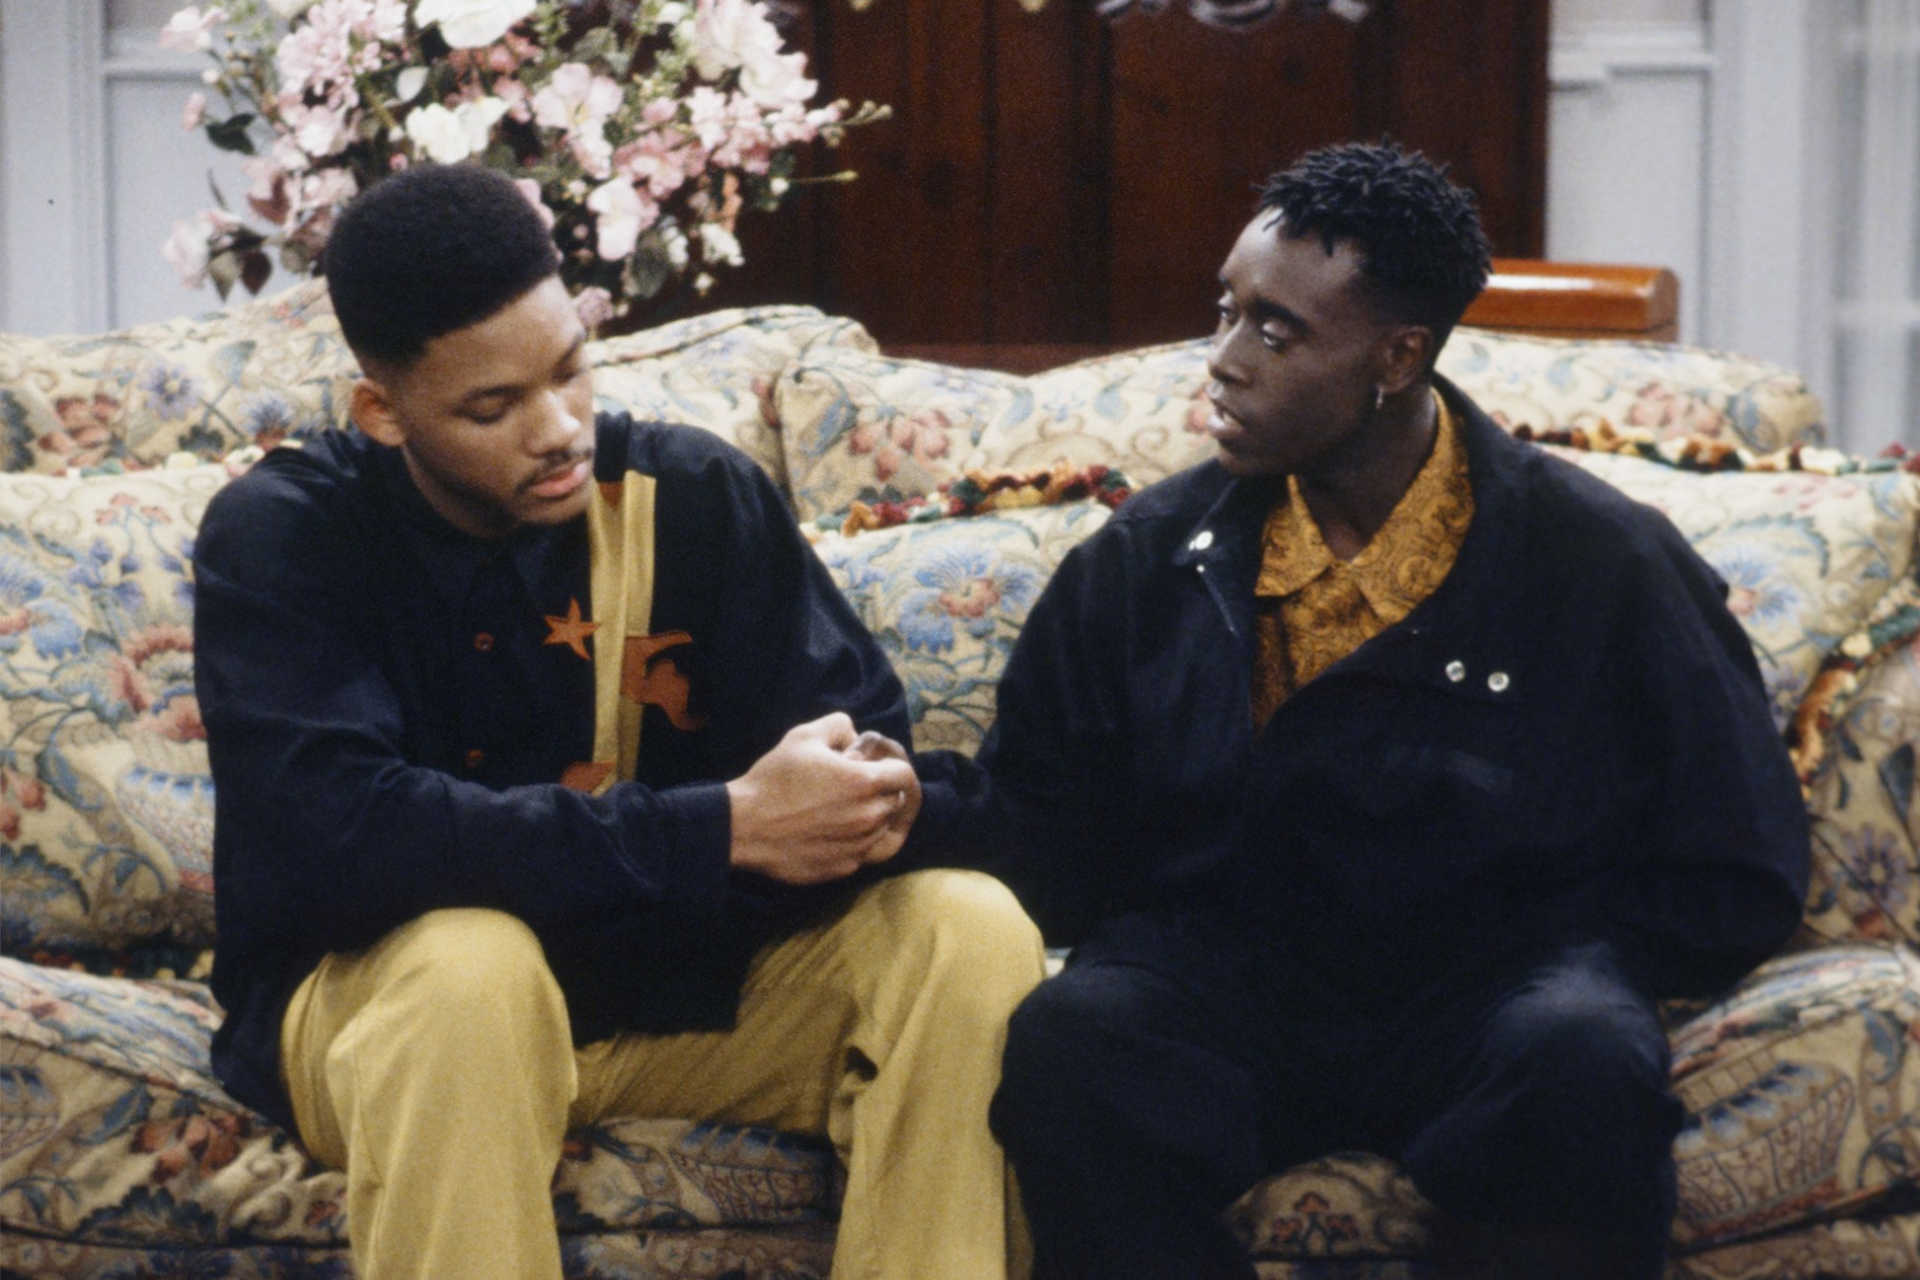 Did you know Don Cheadle had a 'Fresh Prince of Bel-Air' spin-off?